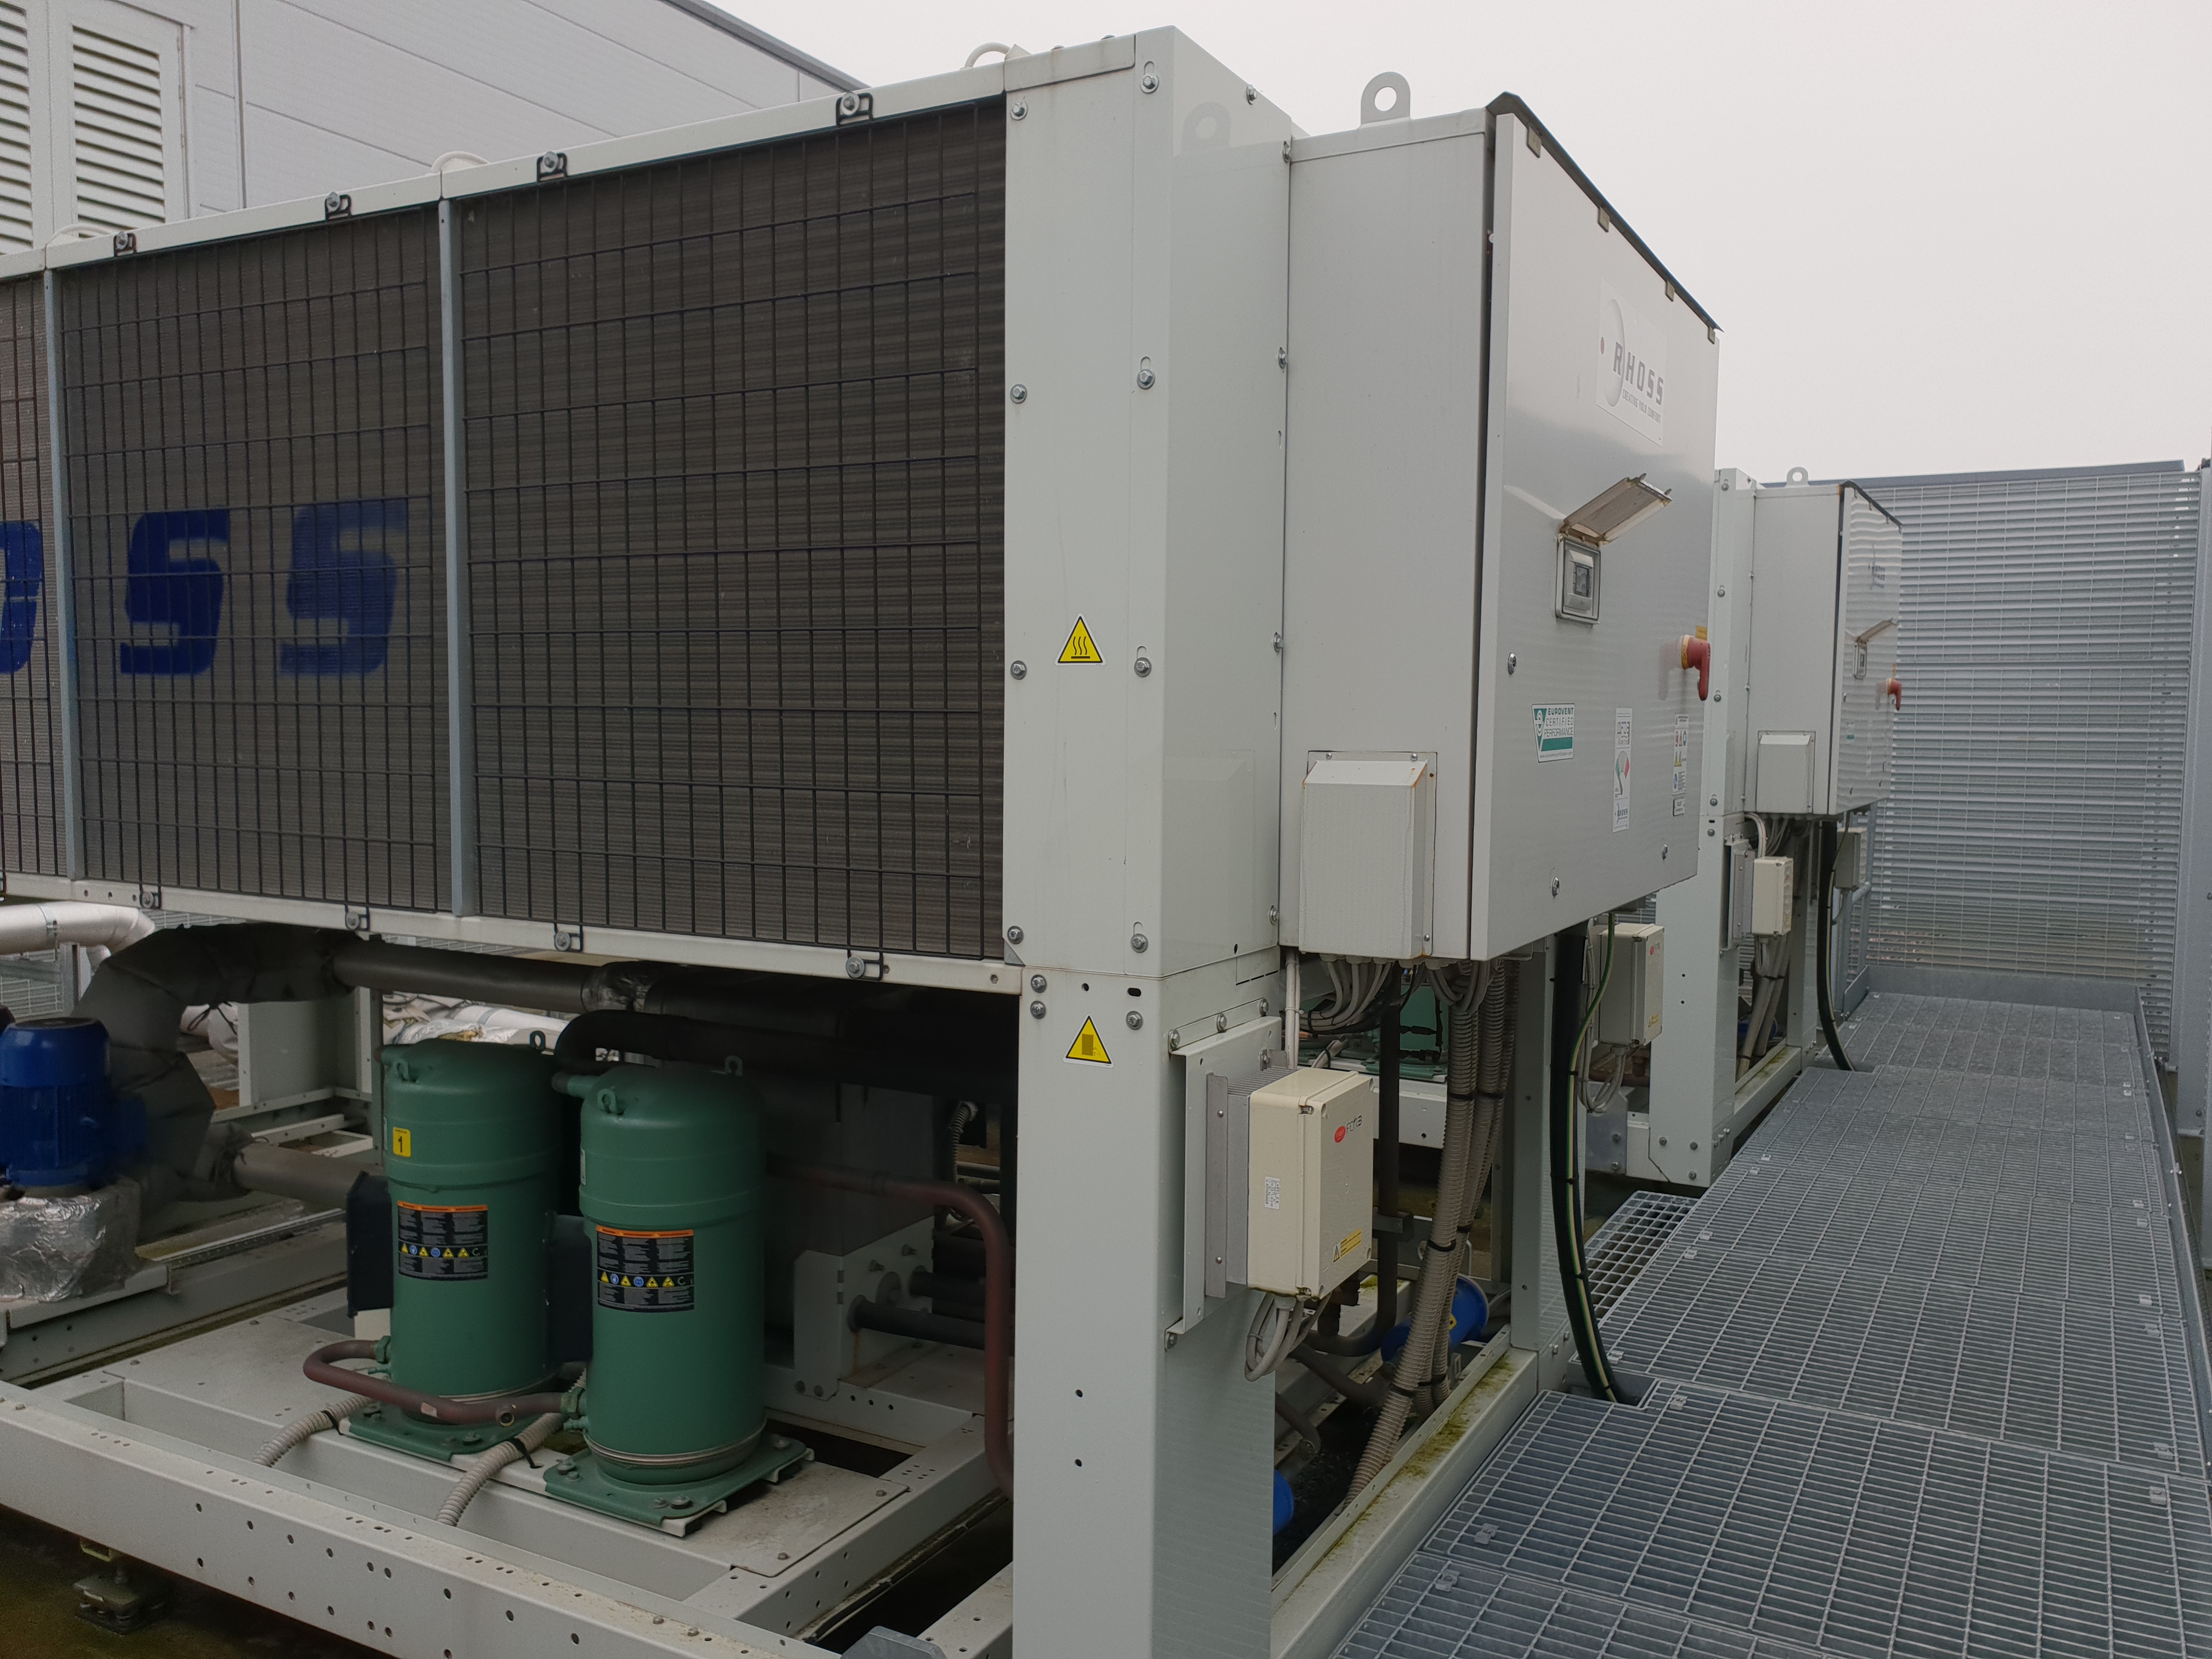 Glycol chiller maintenance of two white chillers with green compressors